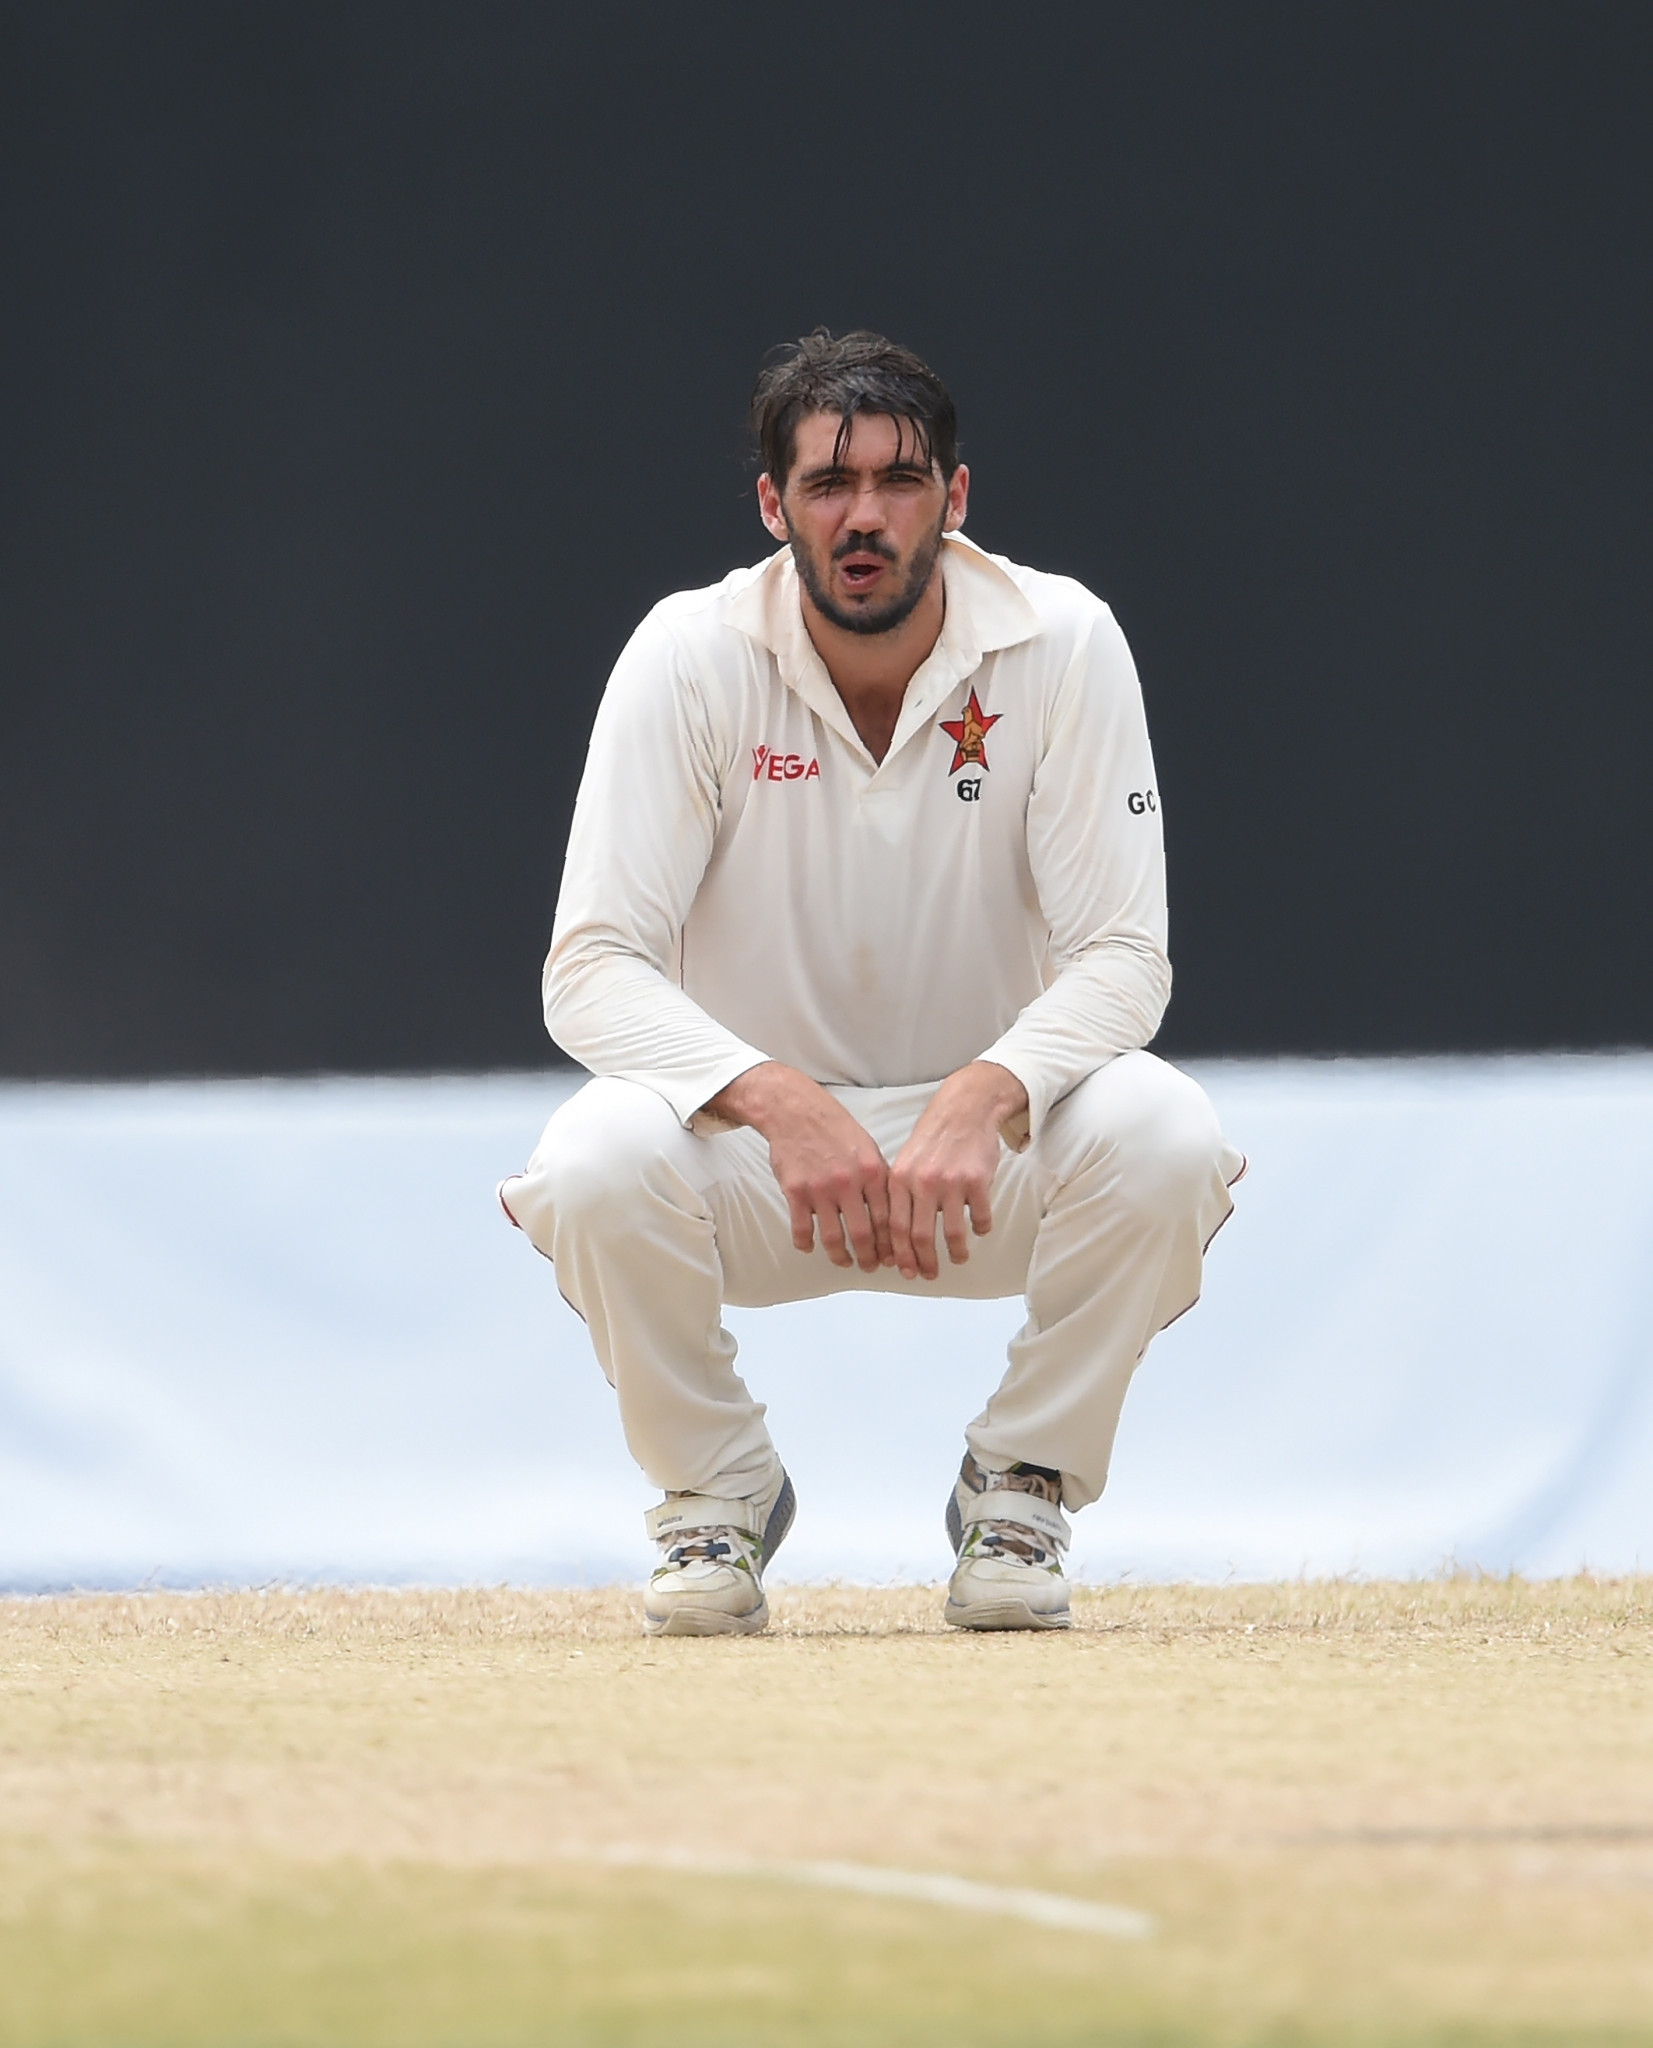 Zimbabwe cricket captain Graeme Cremer has been praised by the ICC for his 